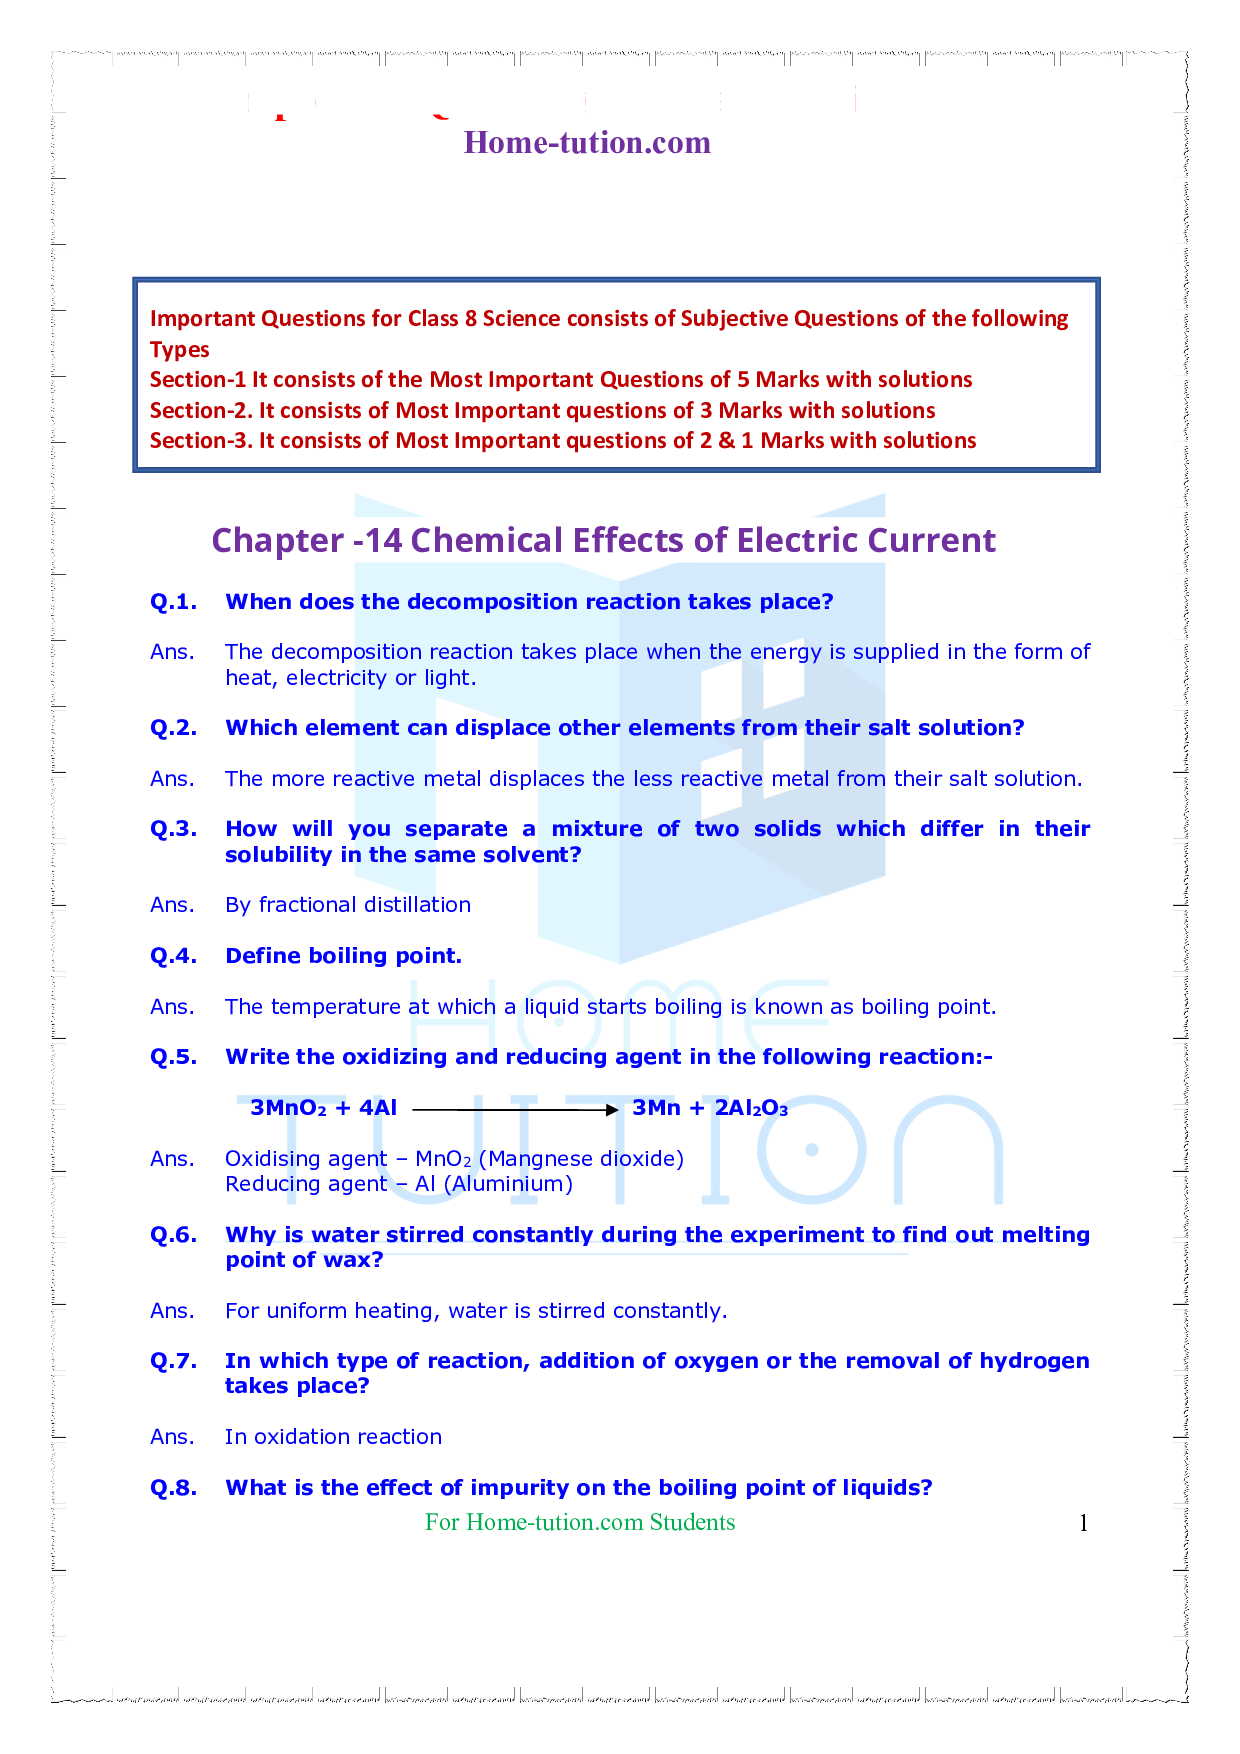 Important Questions for Chapter -14 Chemical Effects of Electric Current